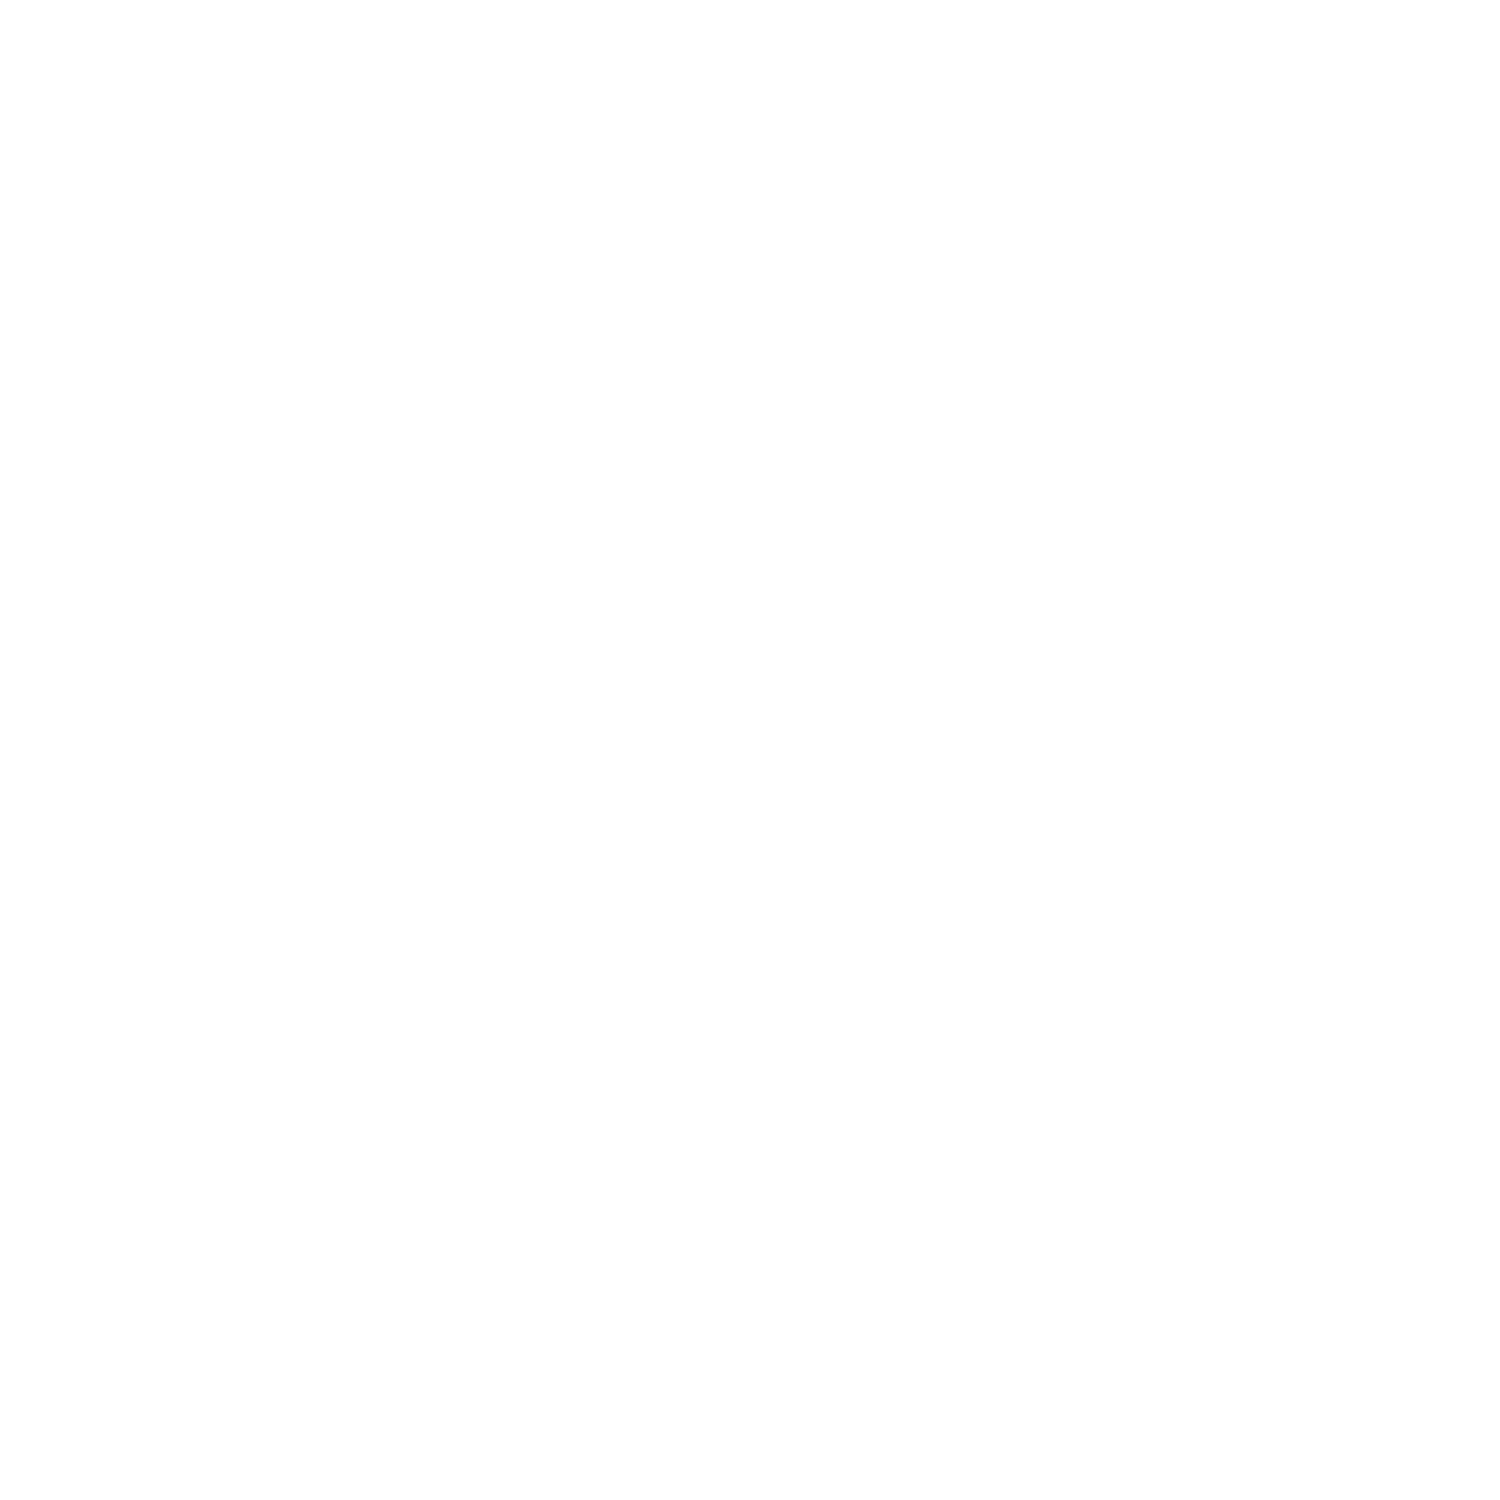 Vancouver Bachata Sensual Weekend is a Latin dance adventure where dancers from all over the world gather to share their passion, knowledge, and love for dancing.